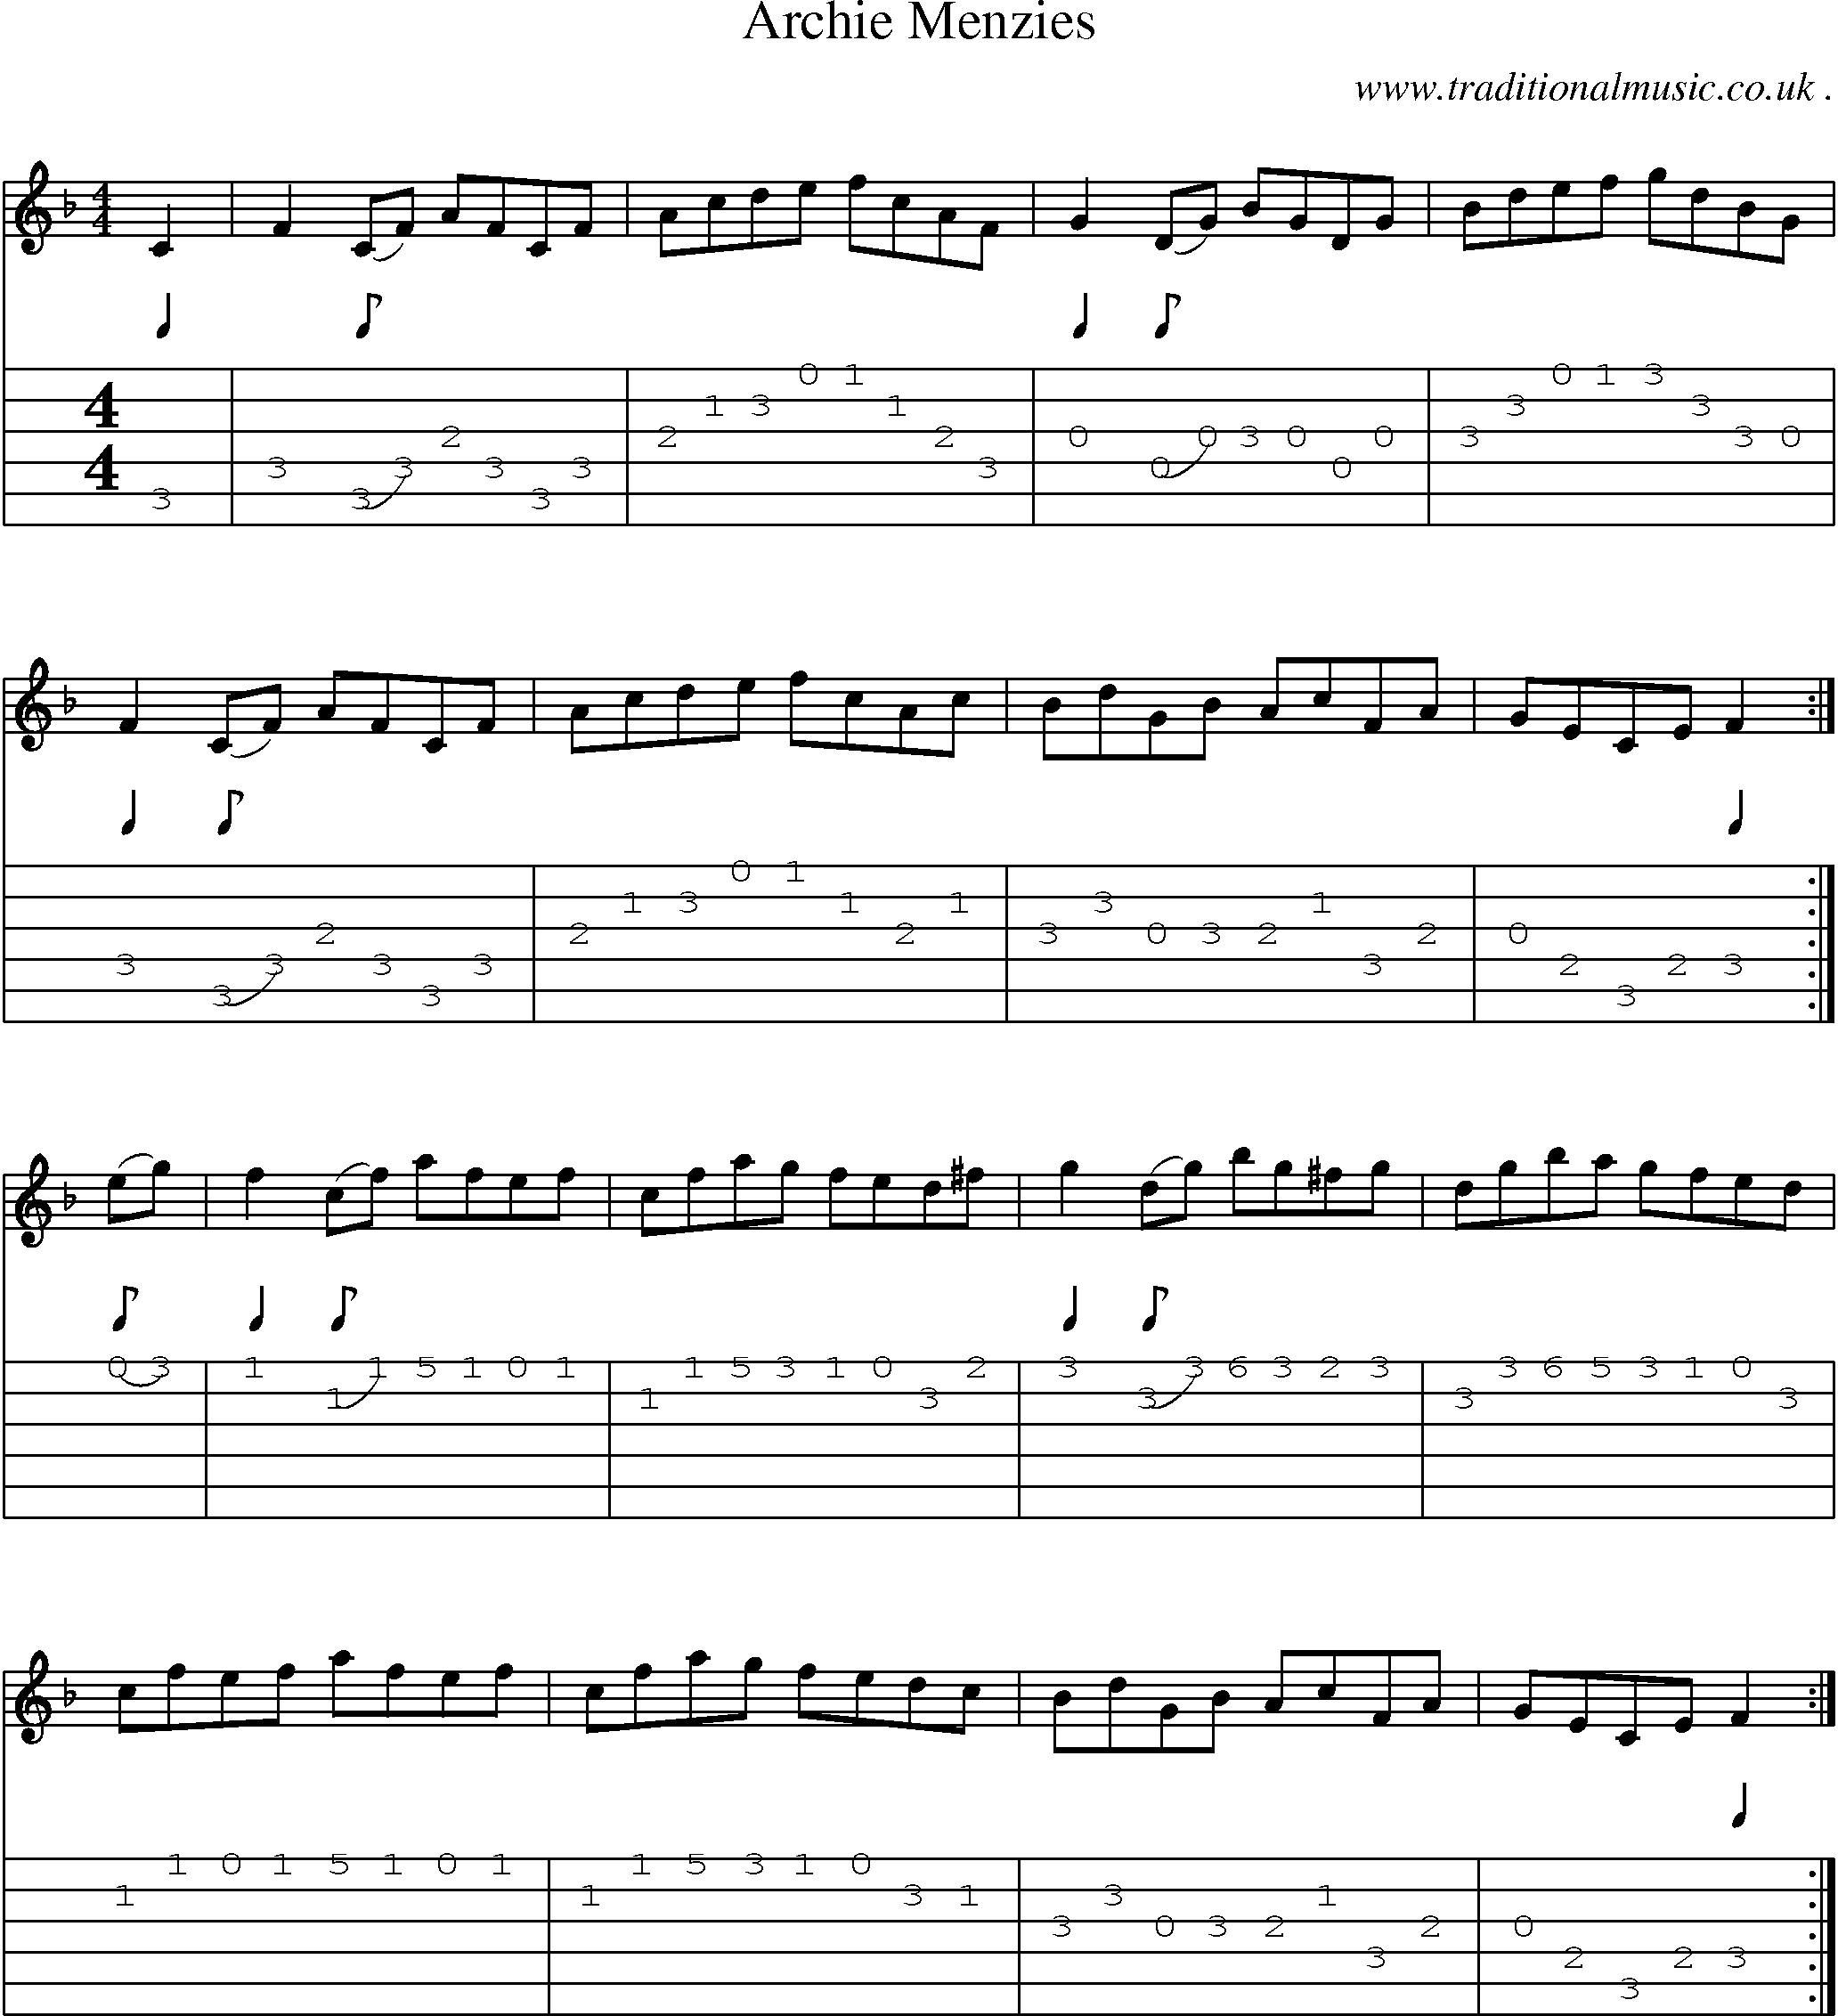 Sheet-Music and Guitar Tabs for Archie Menzies